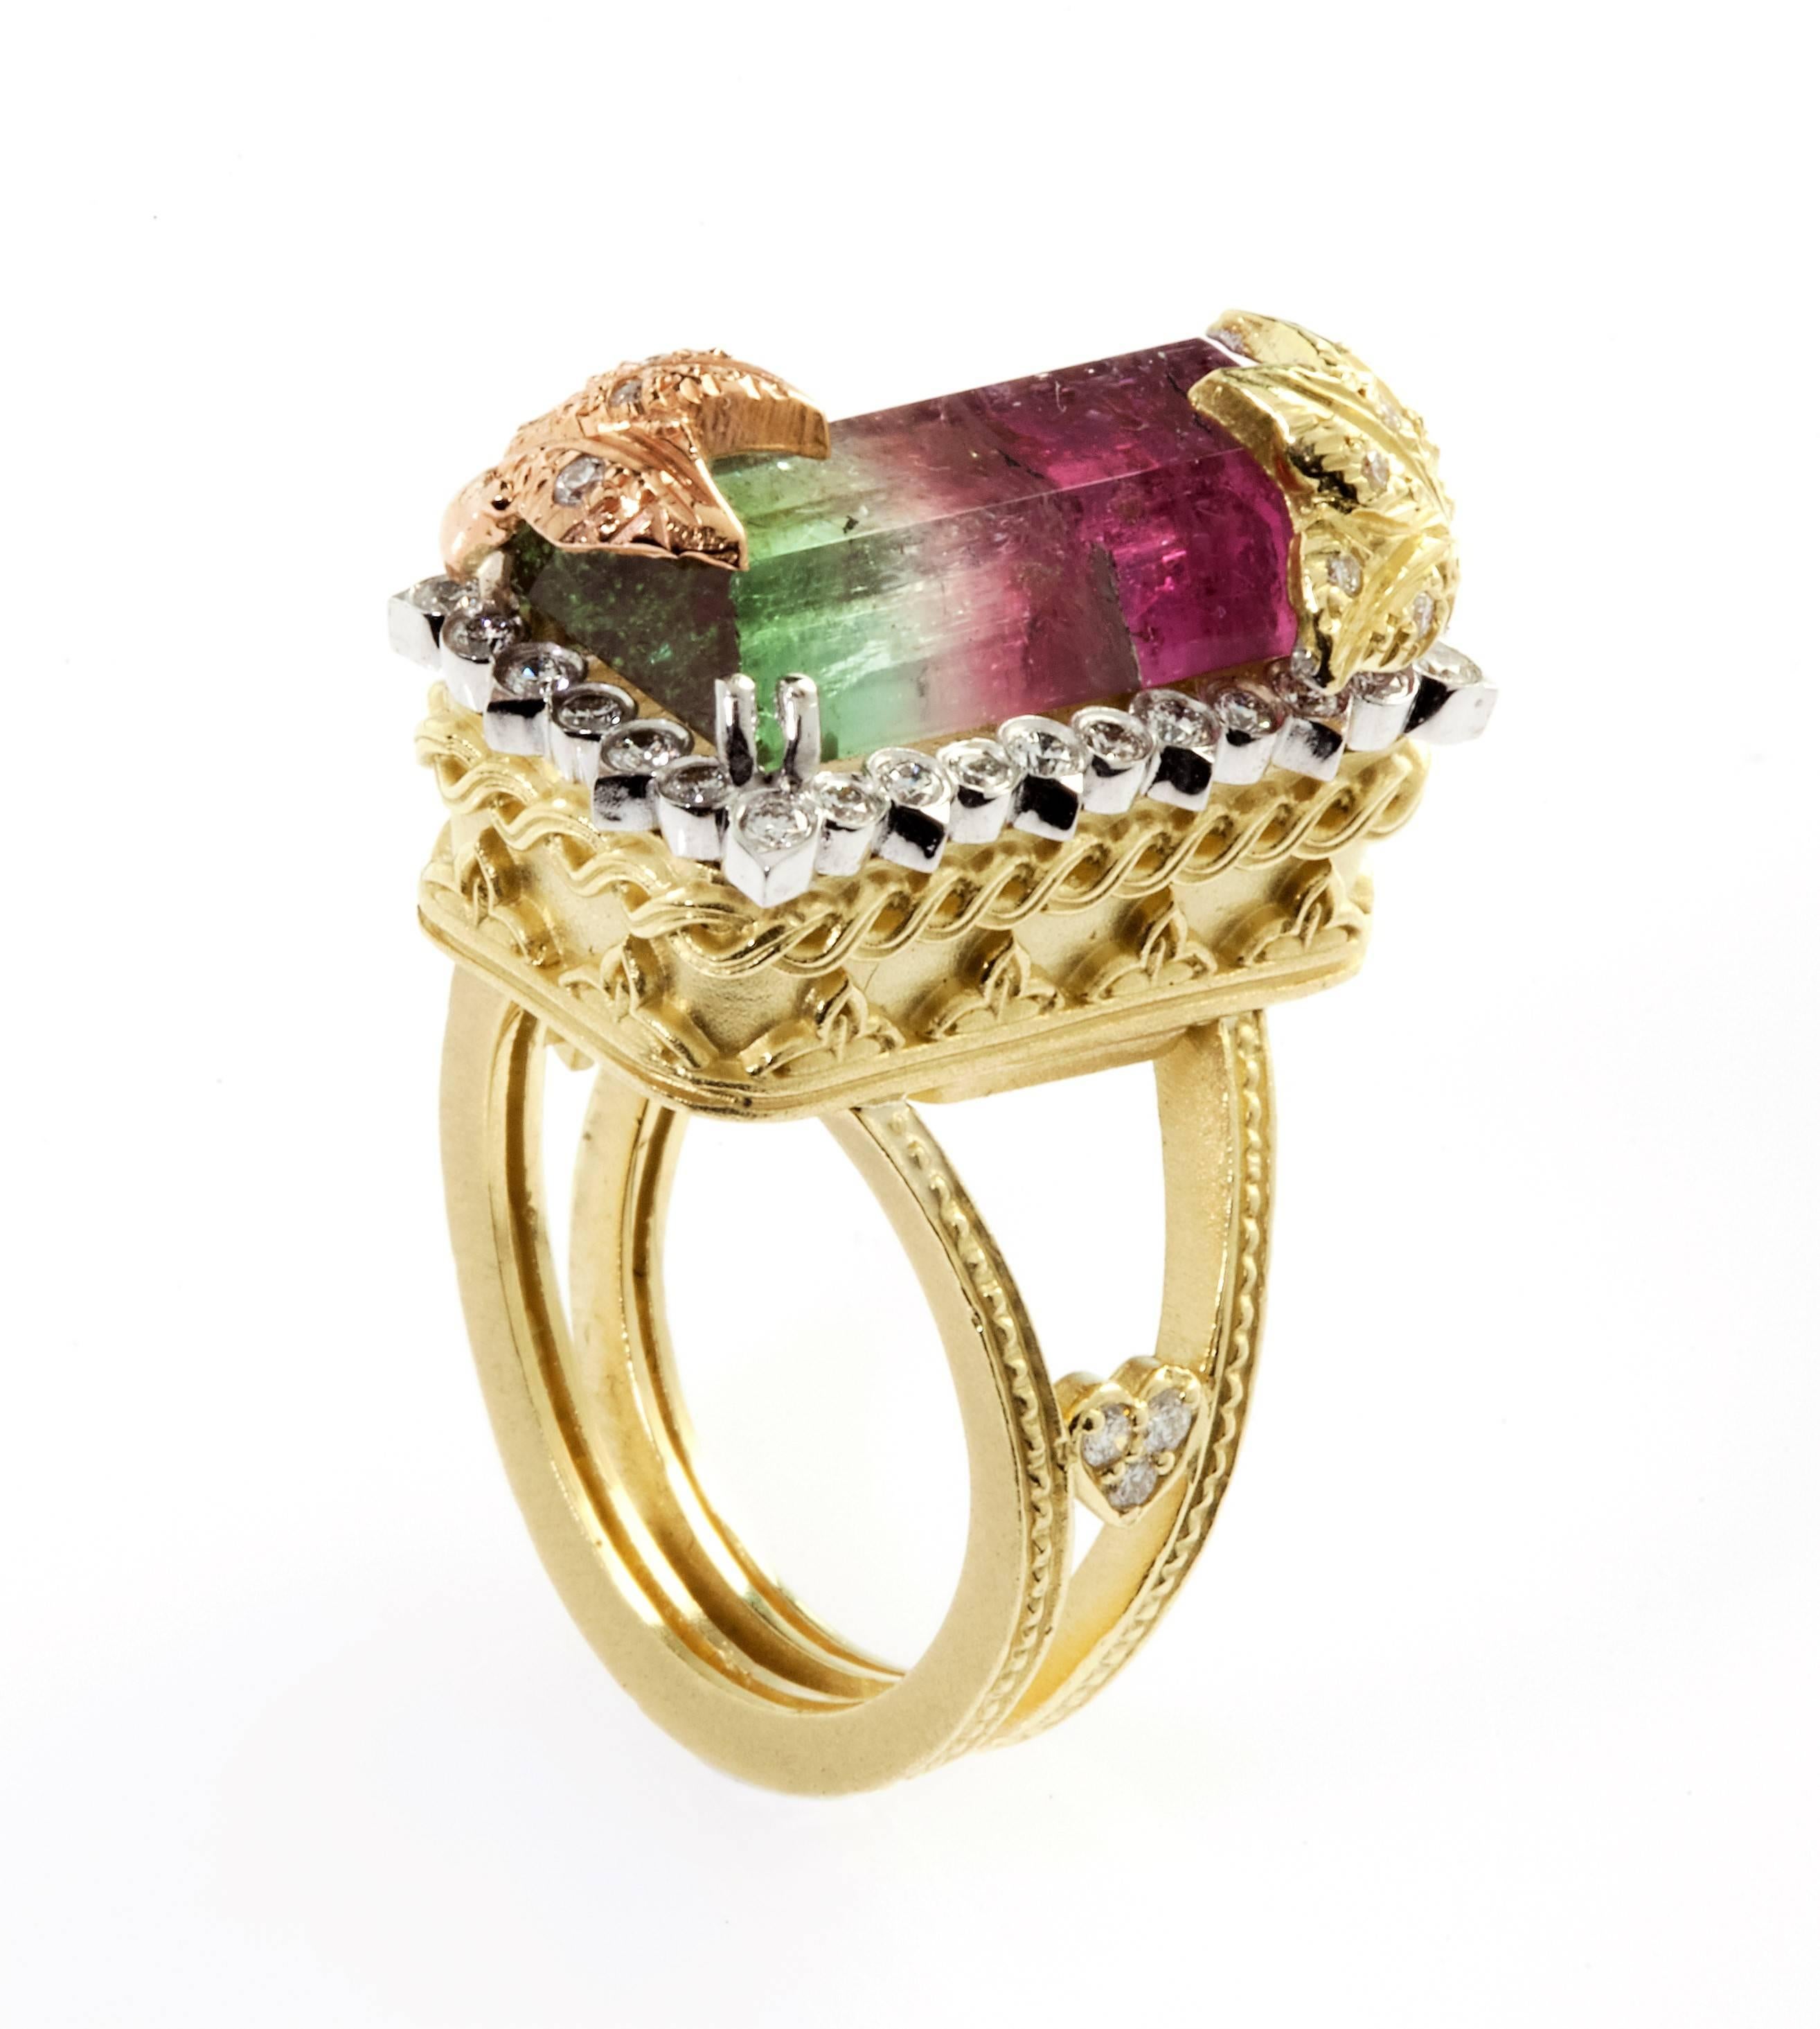 18K Tri-Color Gold Ring with Watermelon Tourmaline Center surrounded by diamonds  

9.56ct. Watermelon Tourmaline Center, above two corners are pink and yellow gold with diamonds, floral design work.  

Watermelon Tourmaline 18mm x 9mm. 